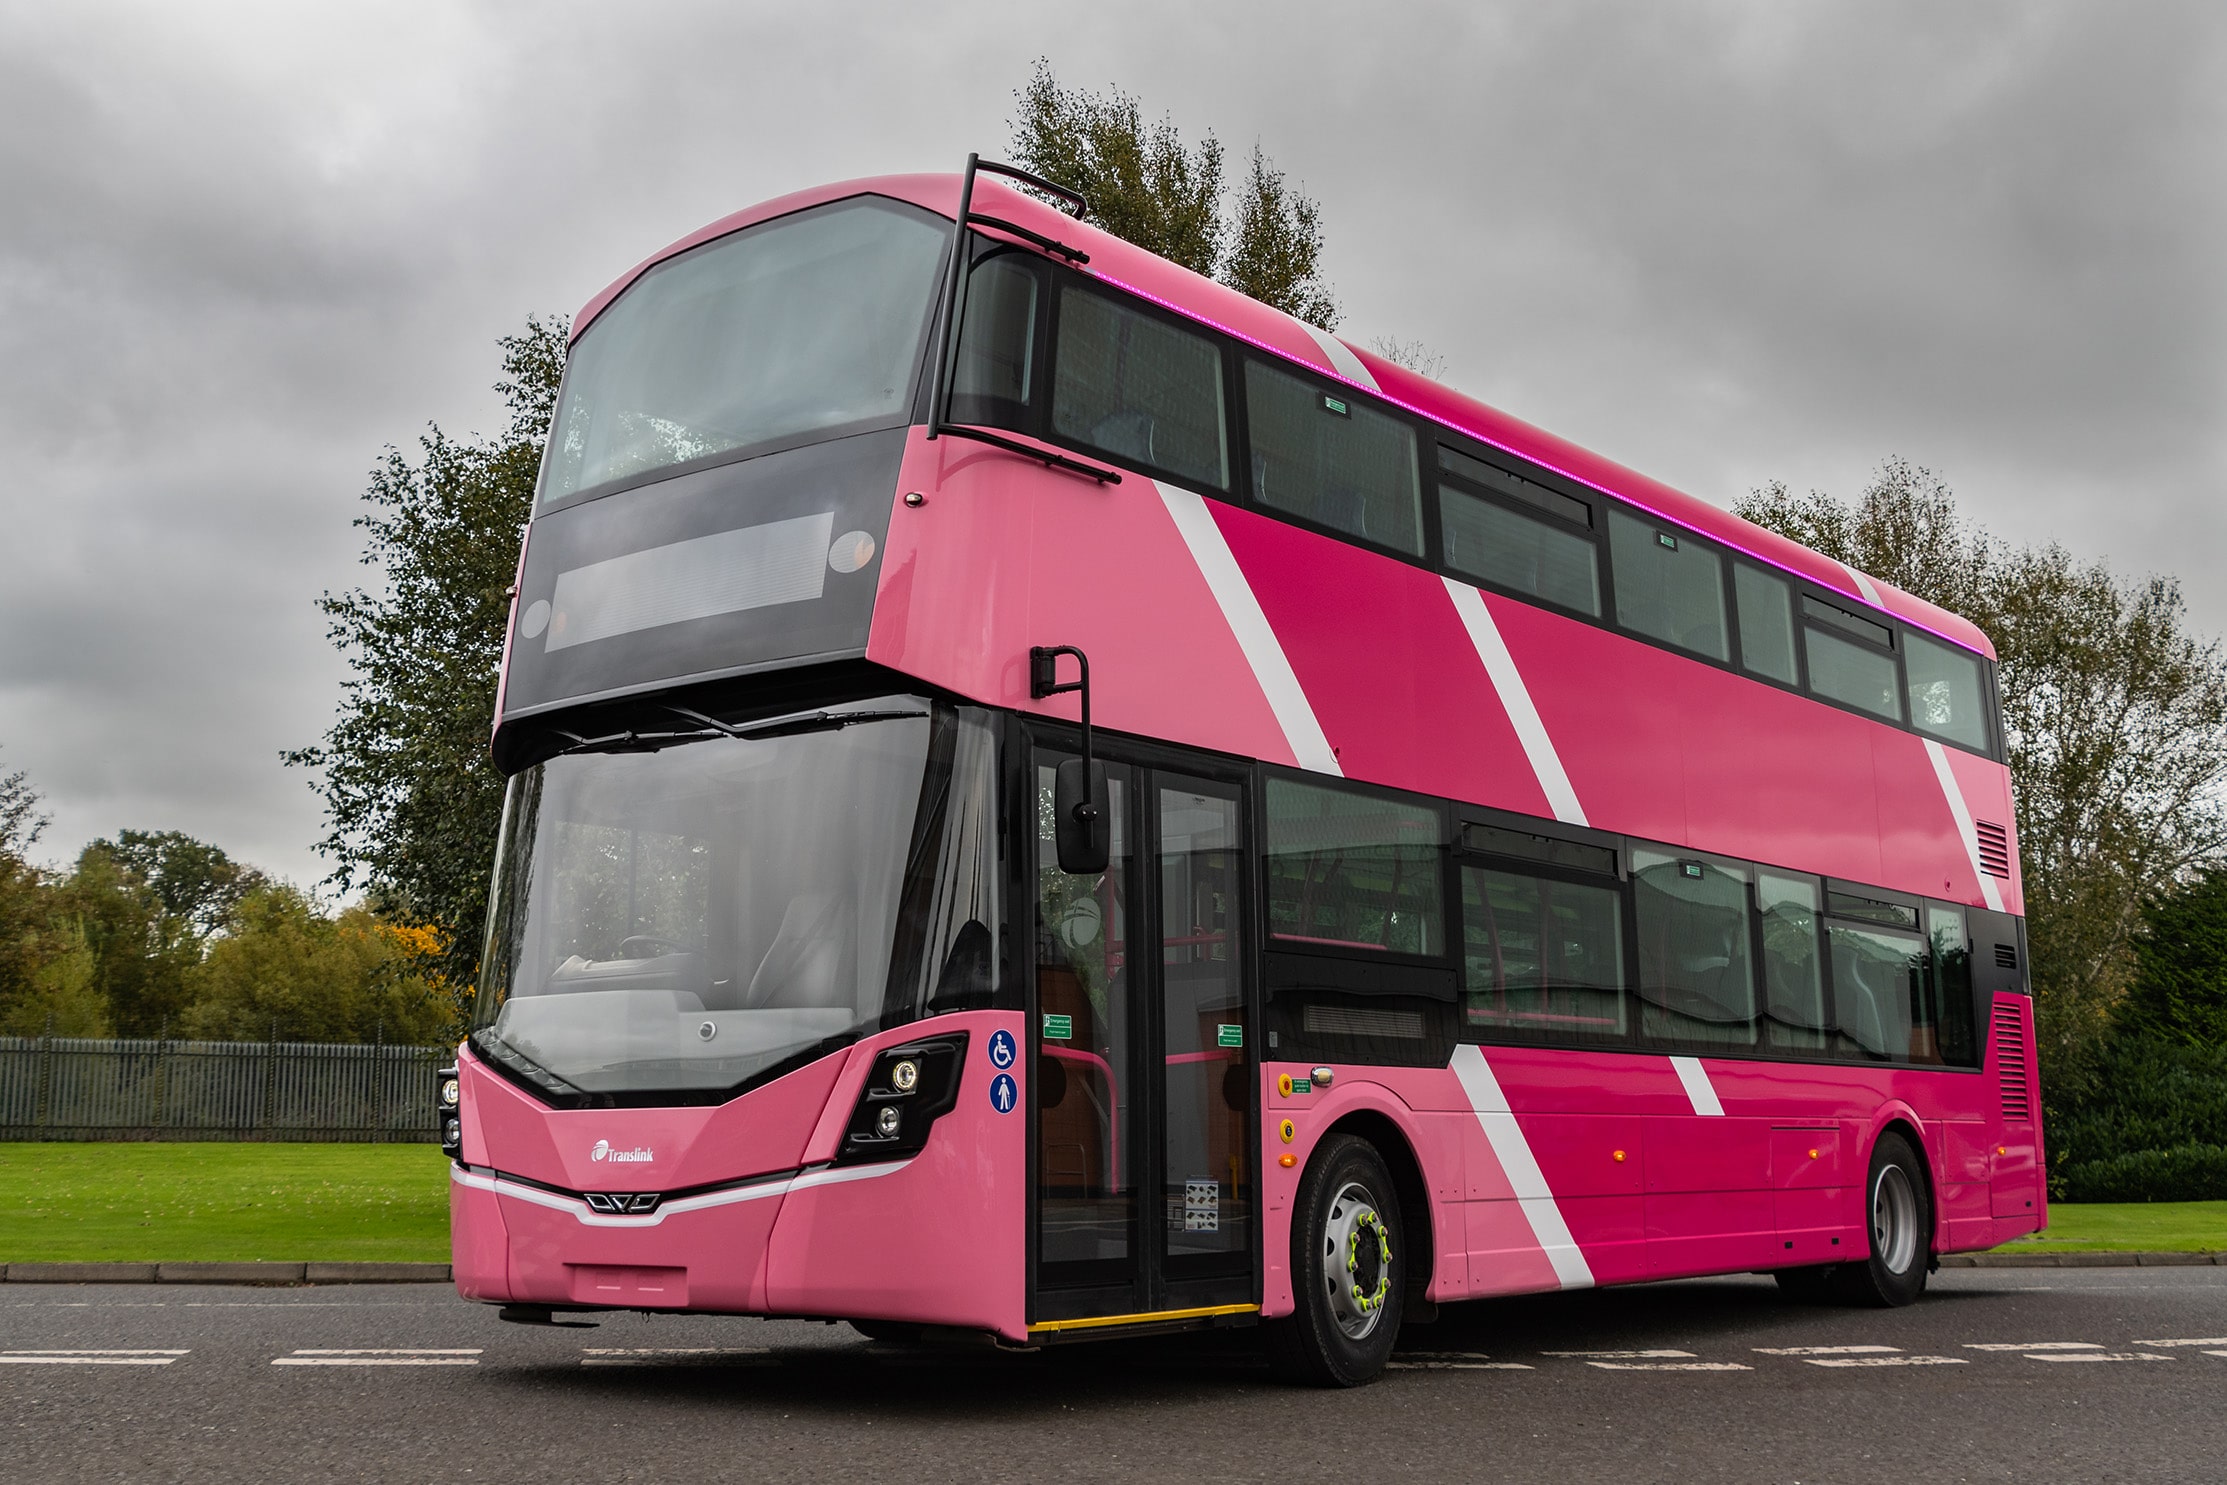 Wrightbus Translink £66m order placed